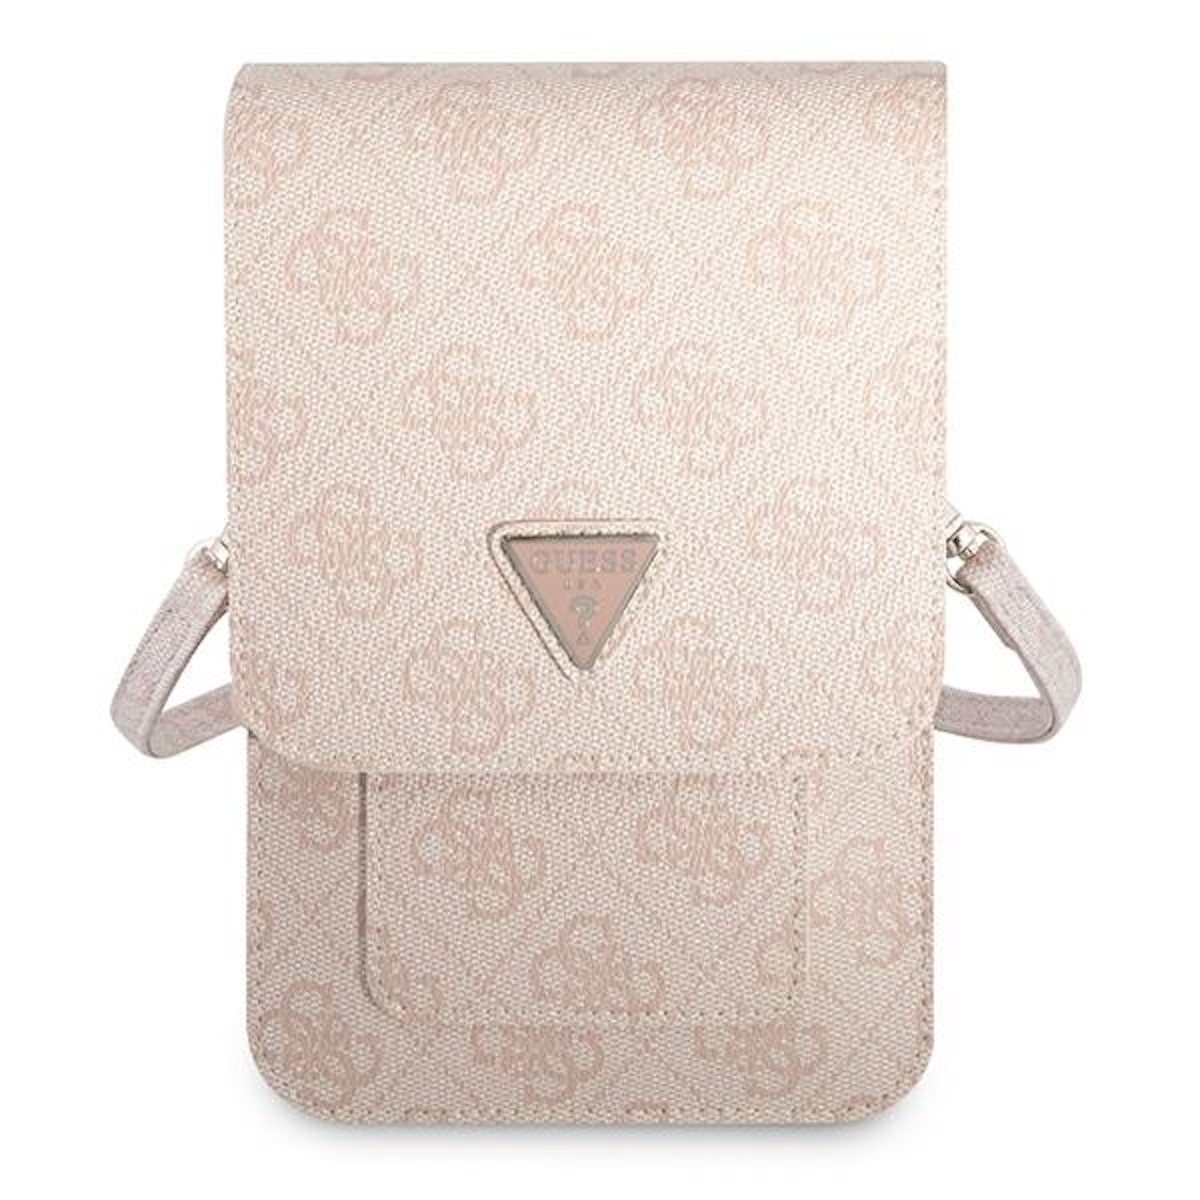 Universelle Full Cover, Triangle Torebka Tasche, Universell, Rosa GUESS Umhängetasche,